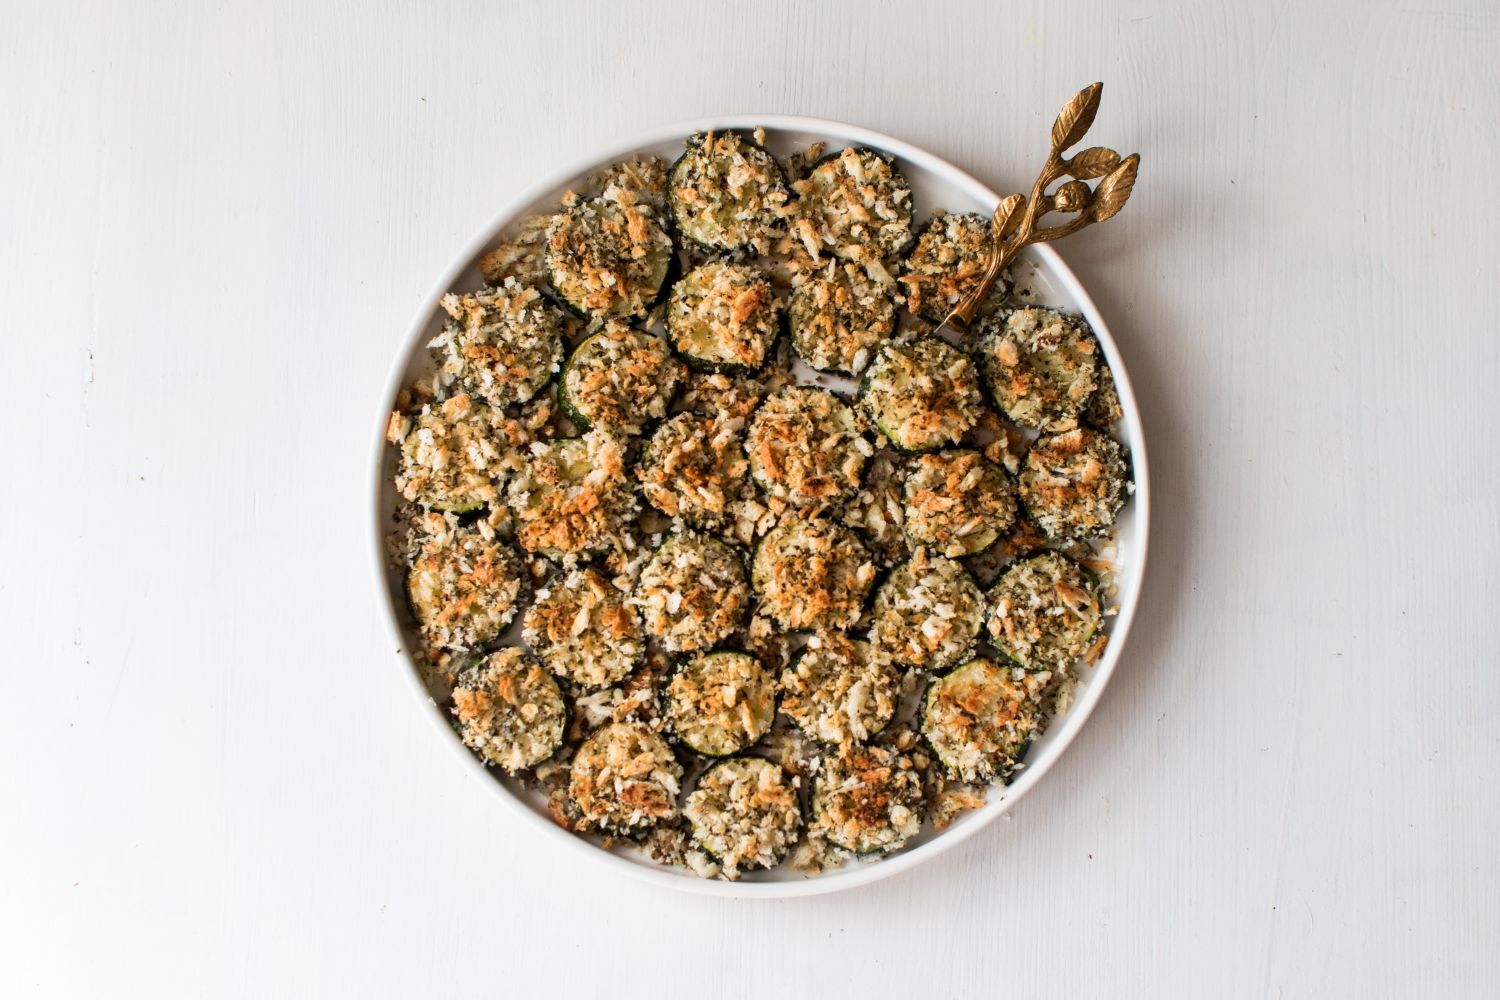 Crispy baked zucchini with panko breadcrumbs and Parmesan cheese.